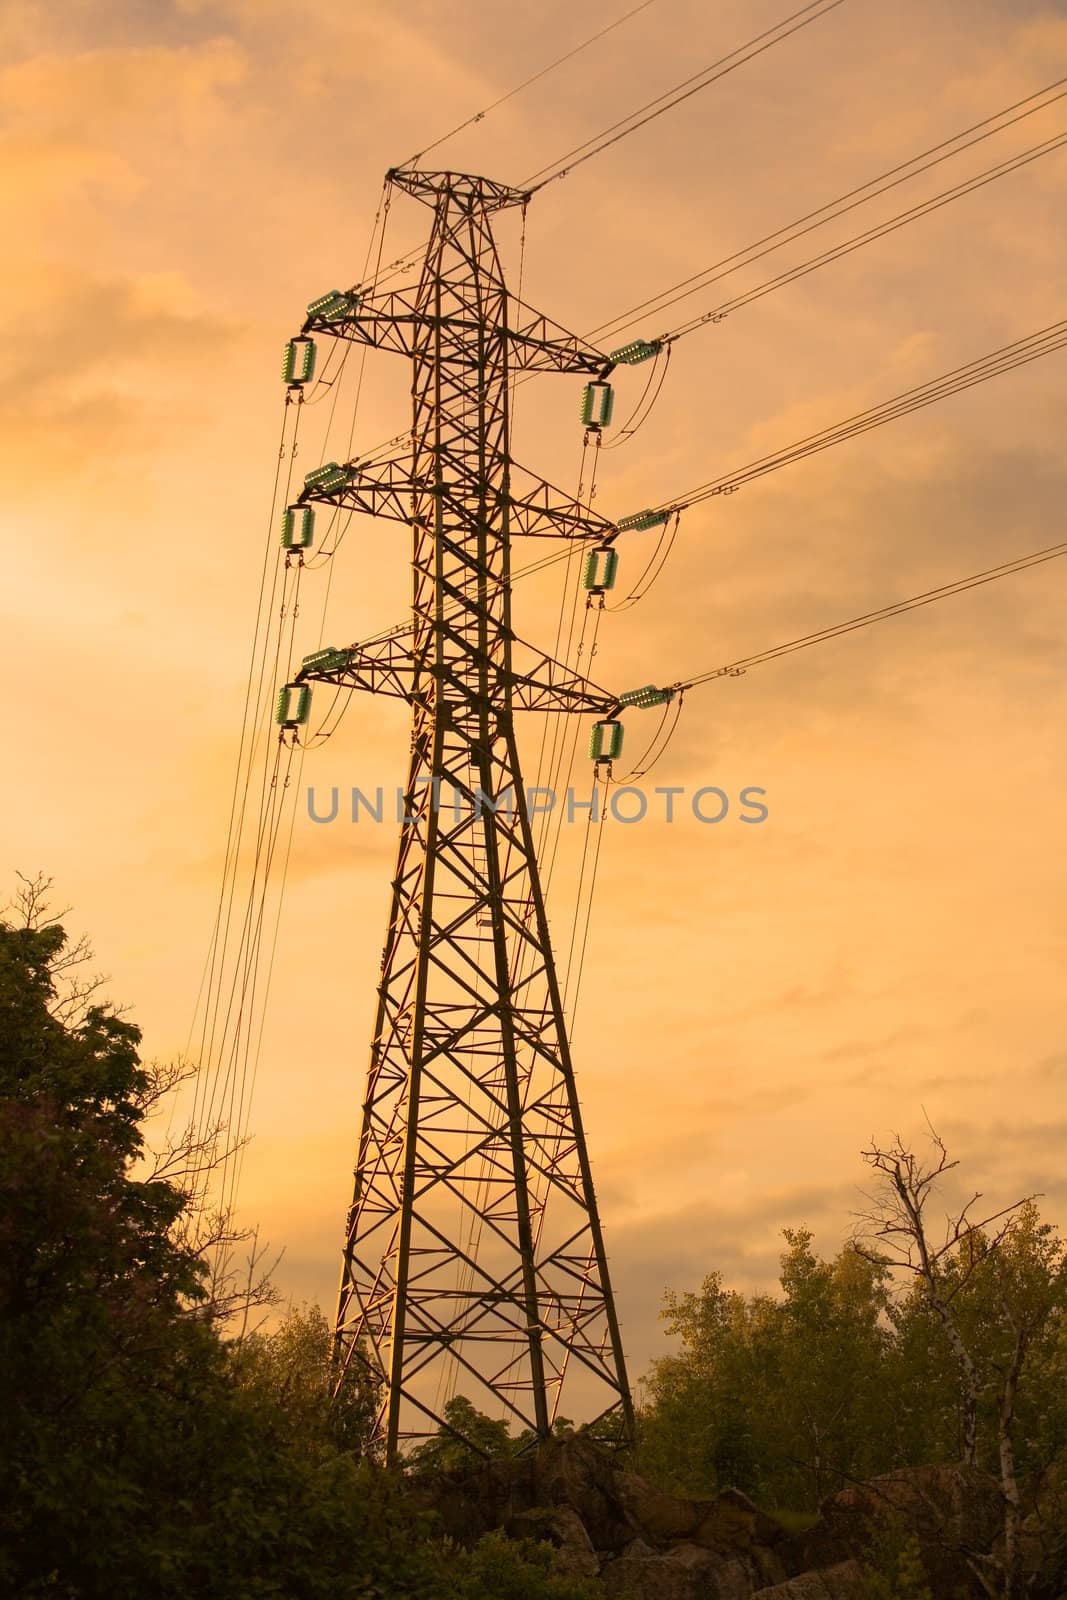 Electricity pylon with clouds and trees in the backround